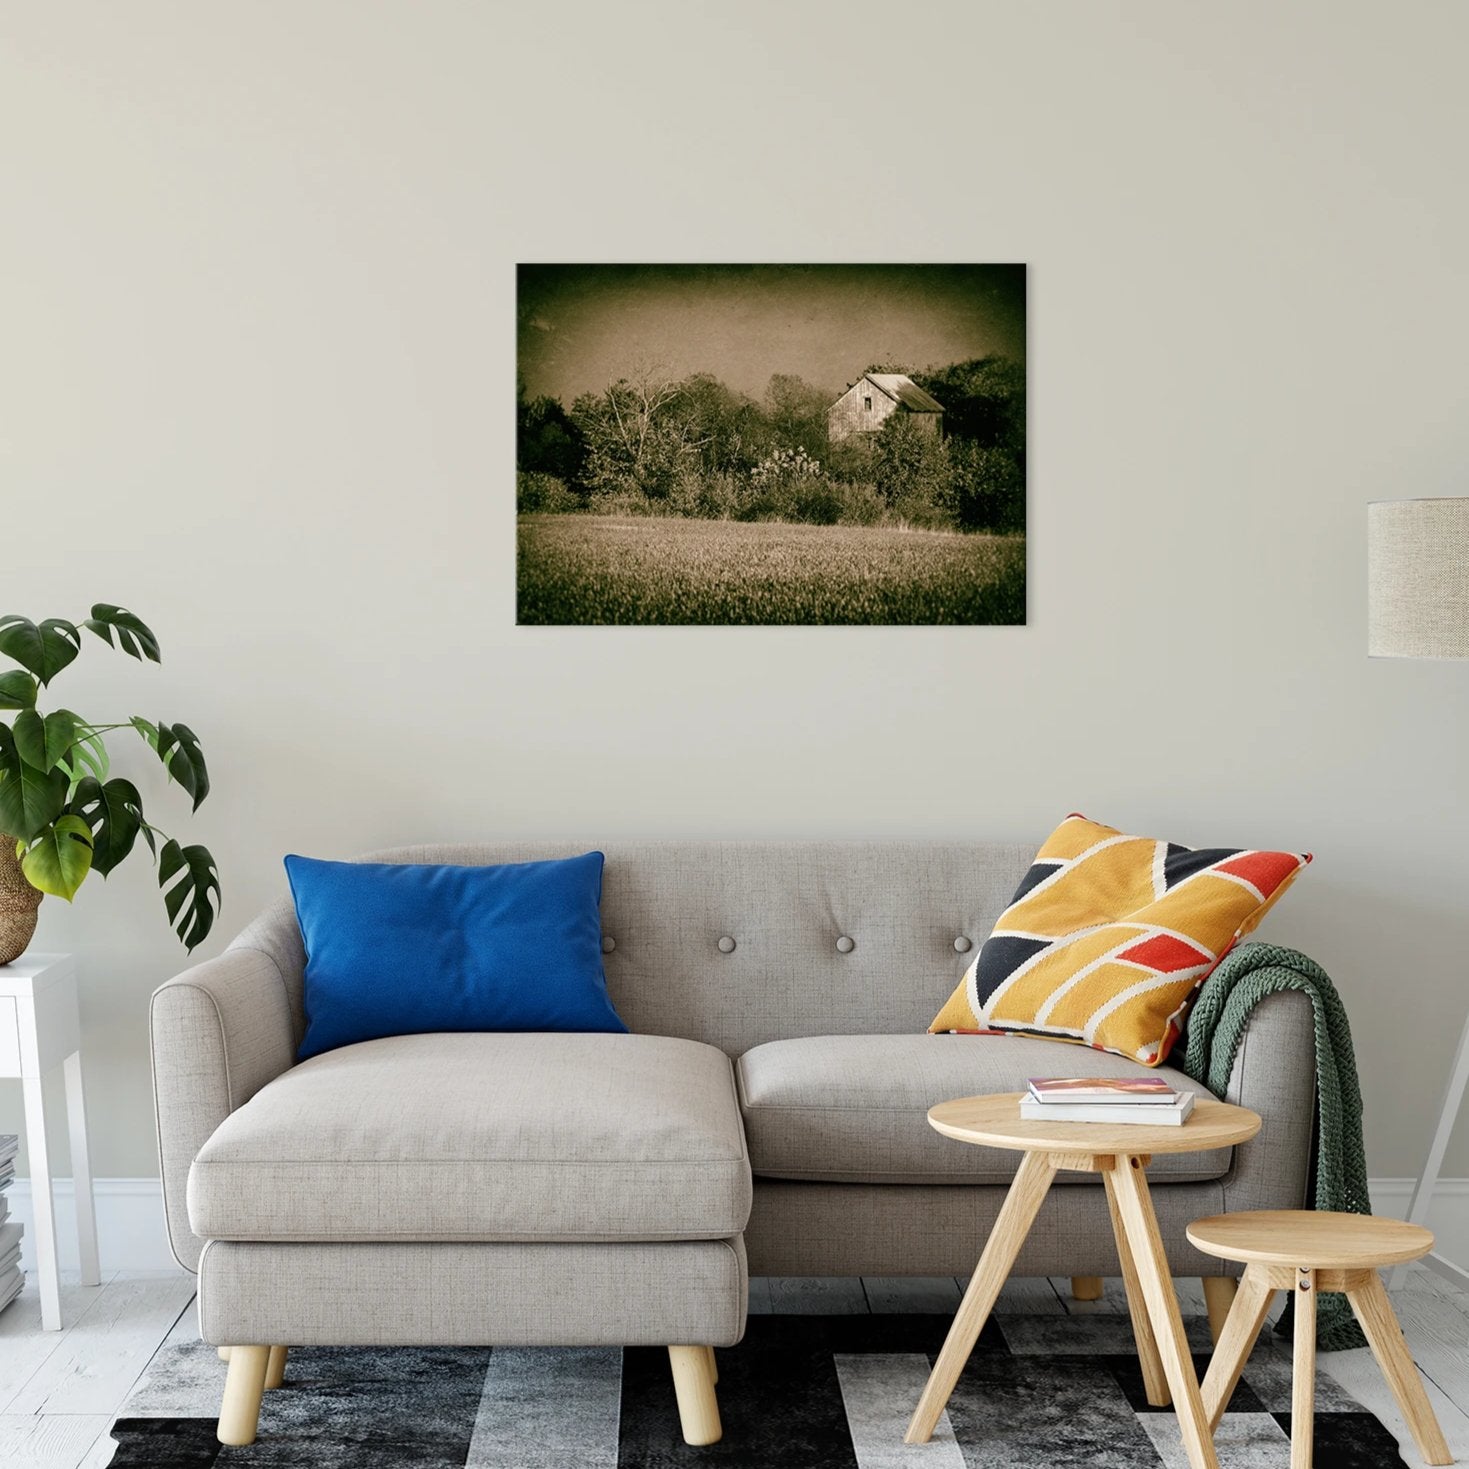 Nature Prints Wall Art: Abandoned Barn In The Trees Vintage Rural Landscape Fine Art Canvas Wall Art Prints 24" x 36" - PIPAFINEART